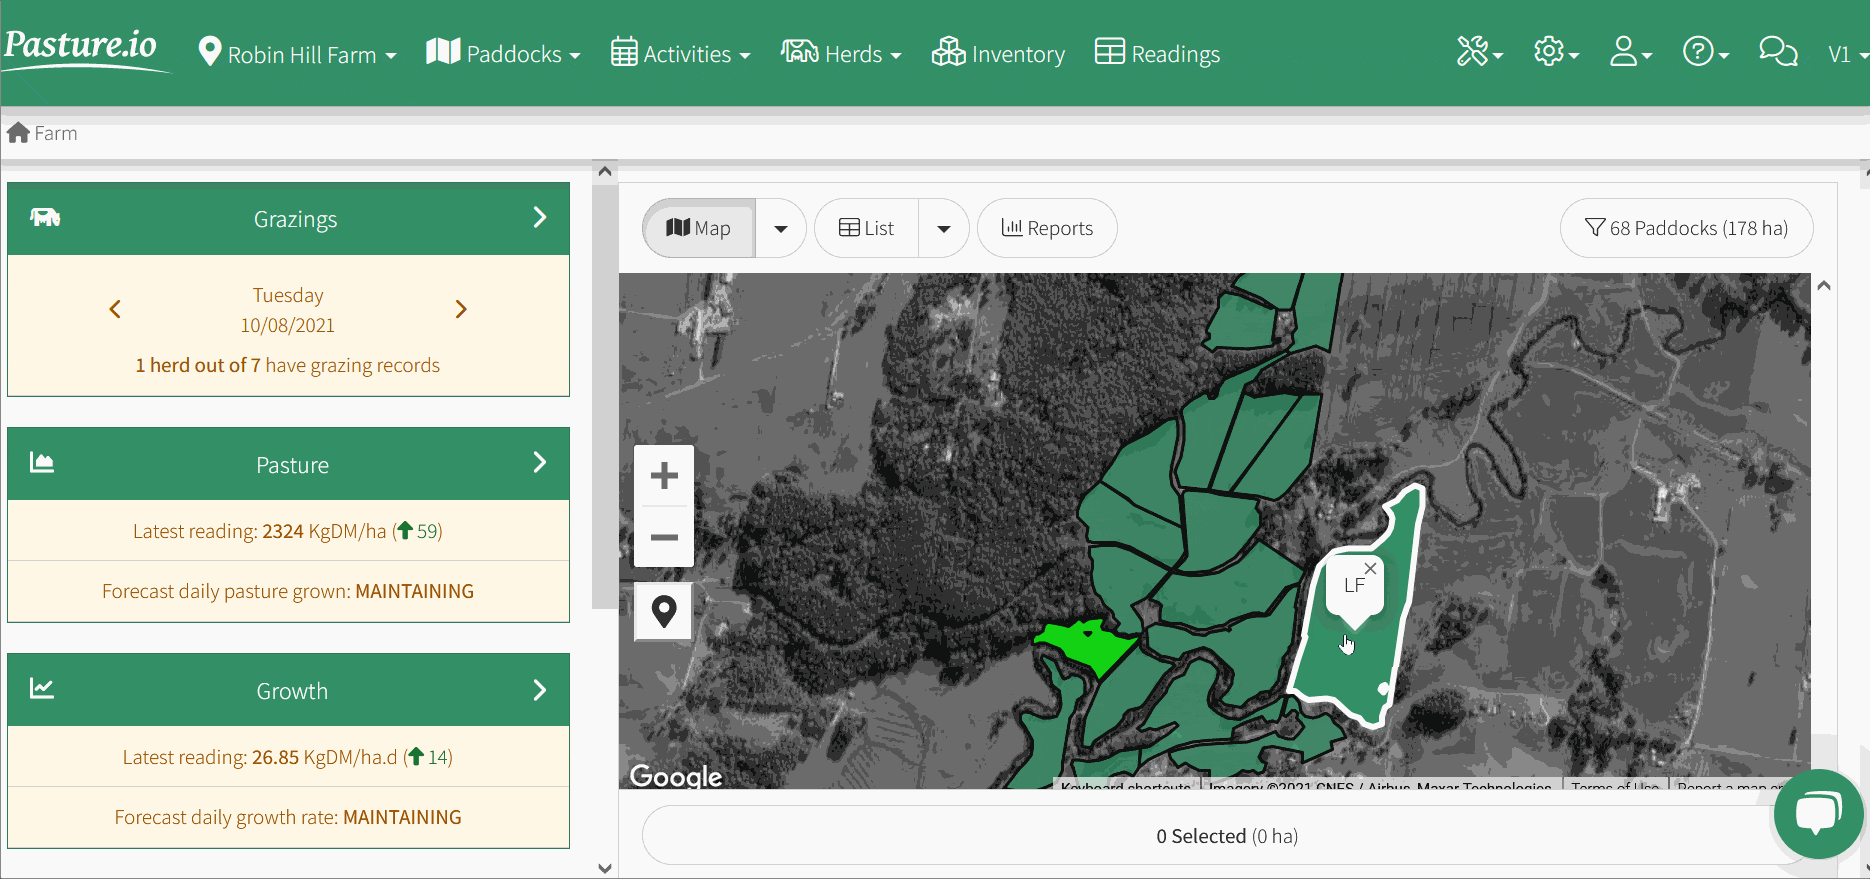 In Pasture.io (farm app), you can also select and deselect multiple paddocks to plan out your grazing events in advance